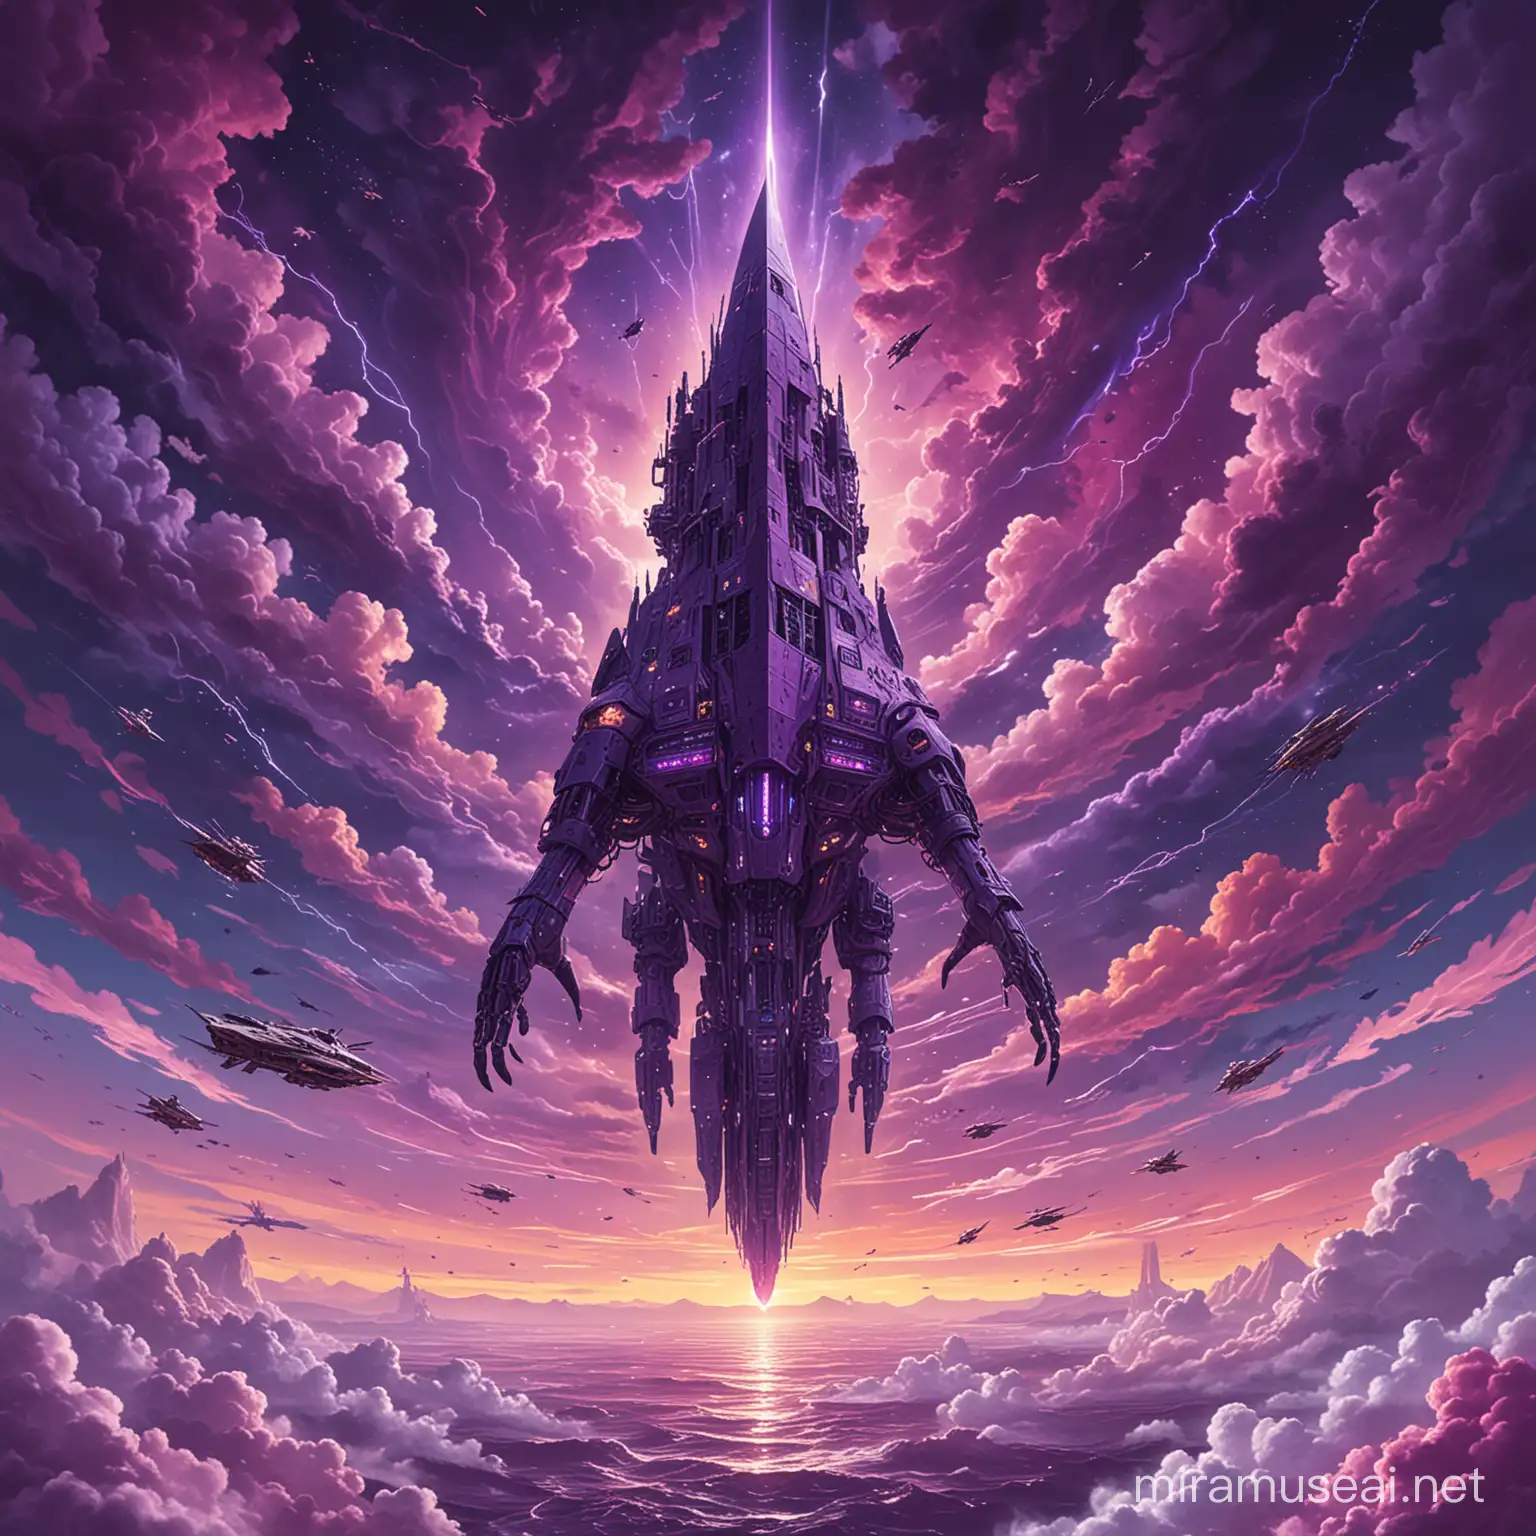 I see a strange and vague  purple ship with real giant human arms and hands sorting of it, flying dangerously in the electric shades of multicolor and foreign skies. it comes front of me. 